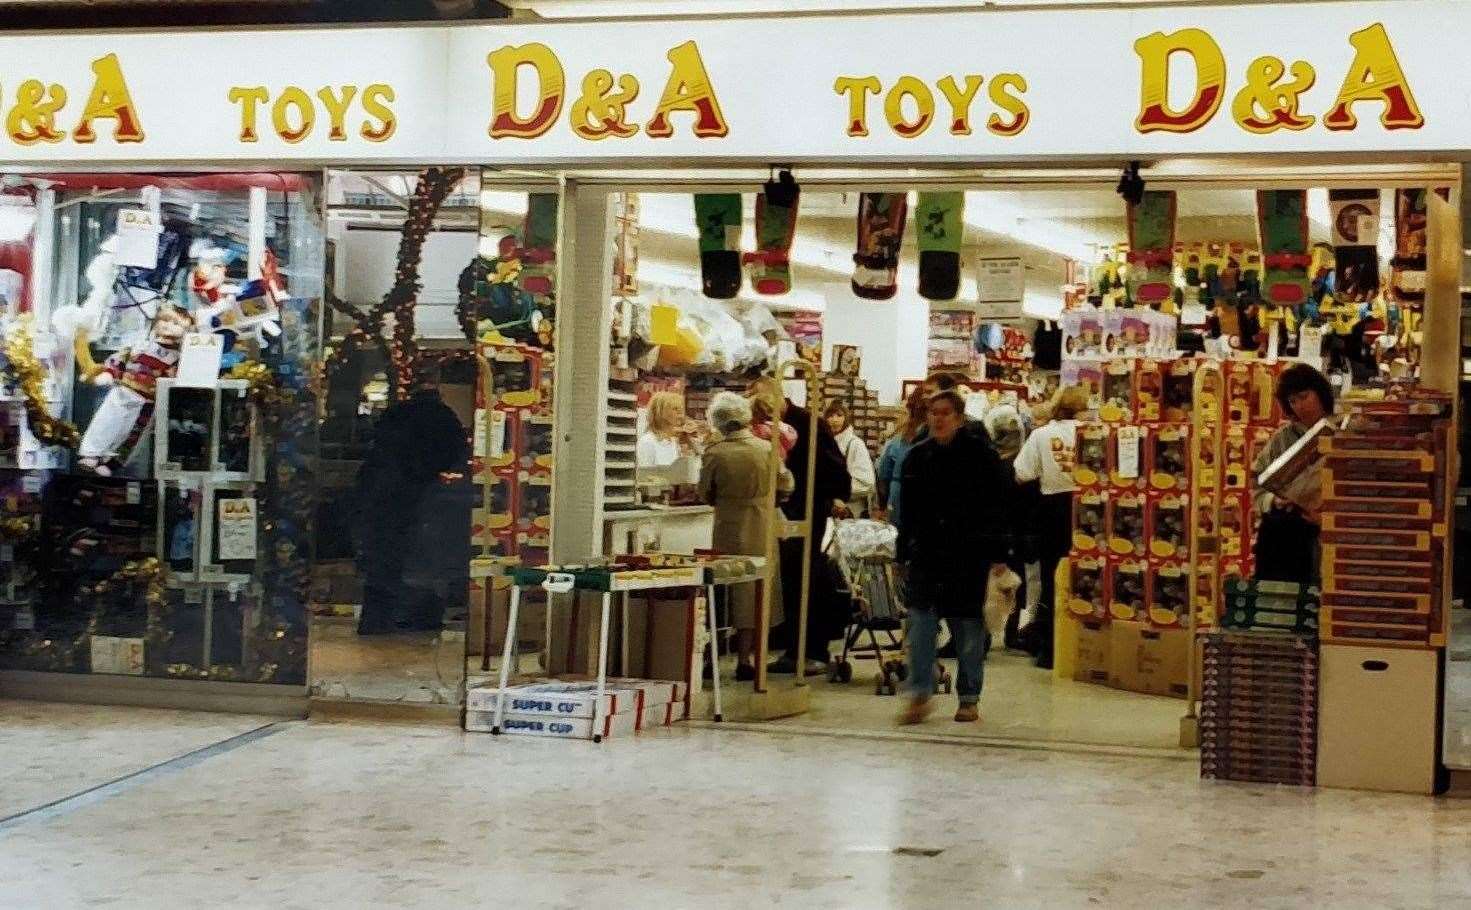 The shop has been in its current unit since the 1980s